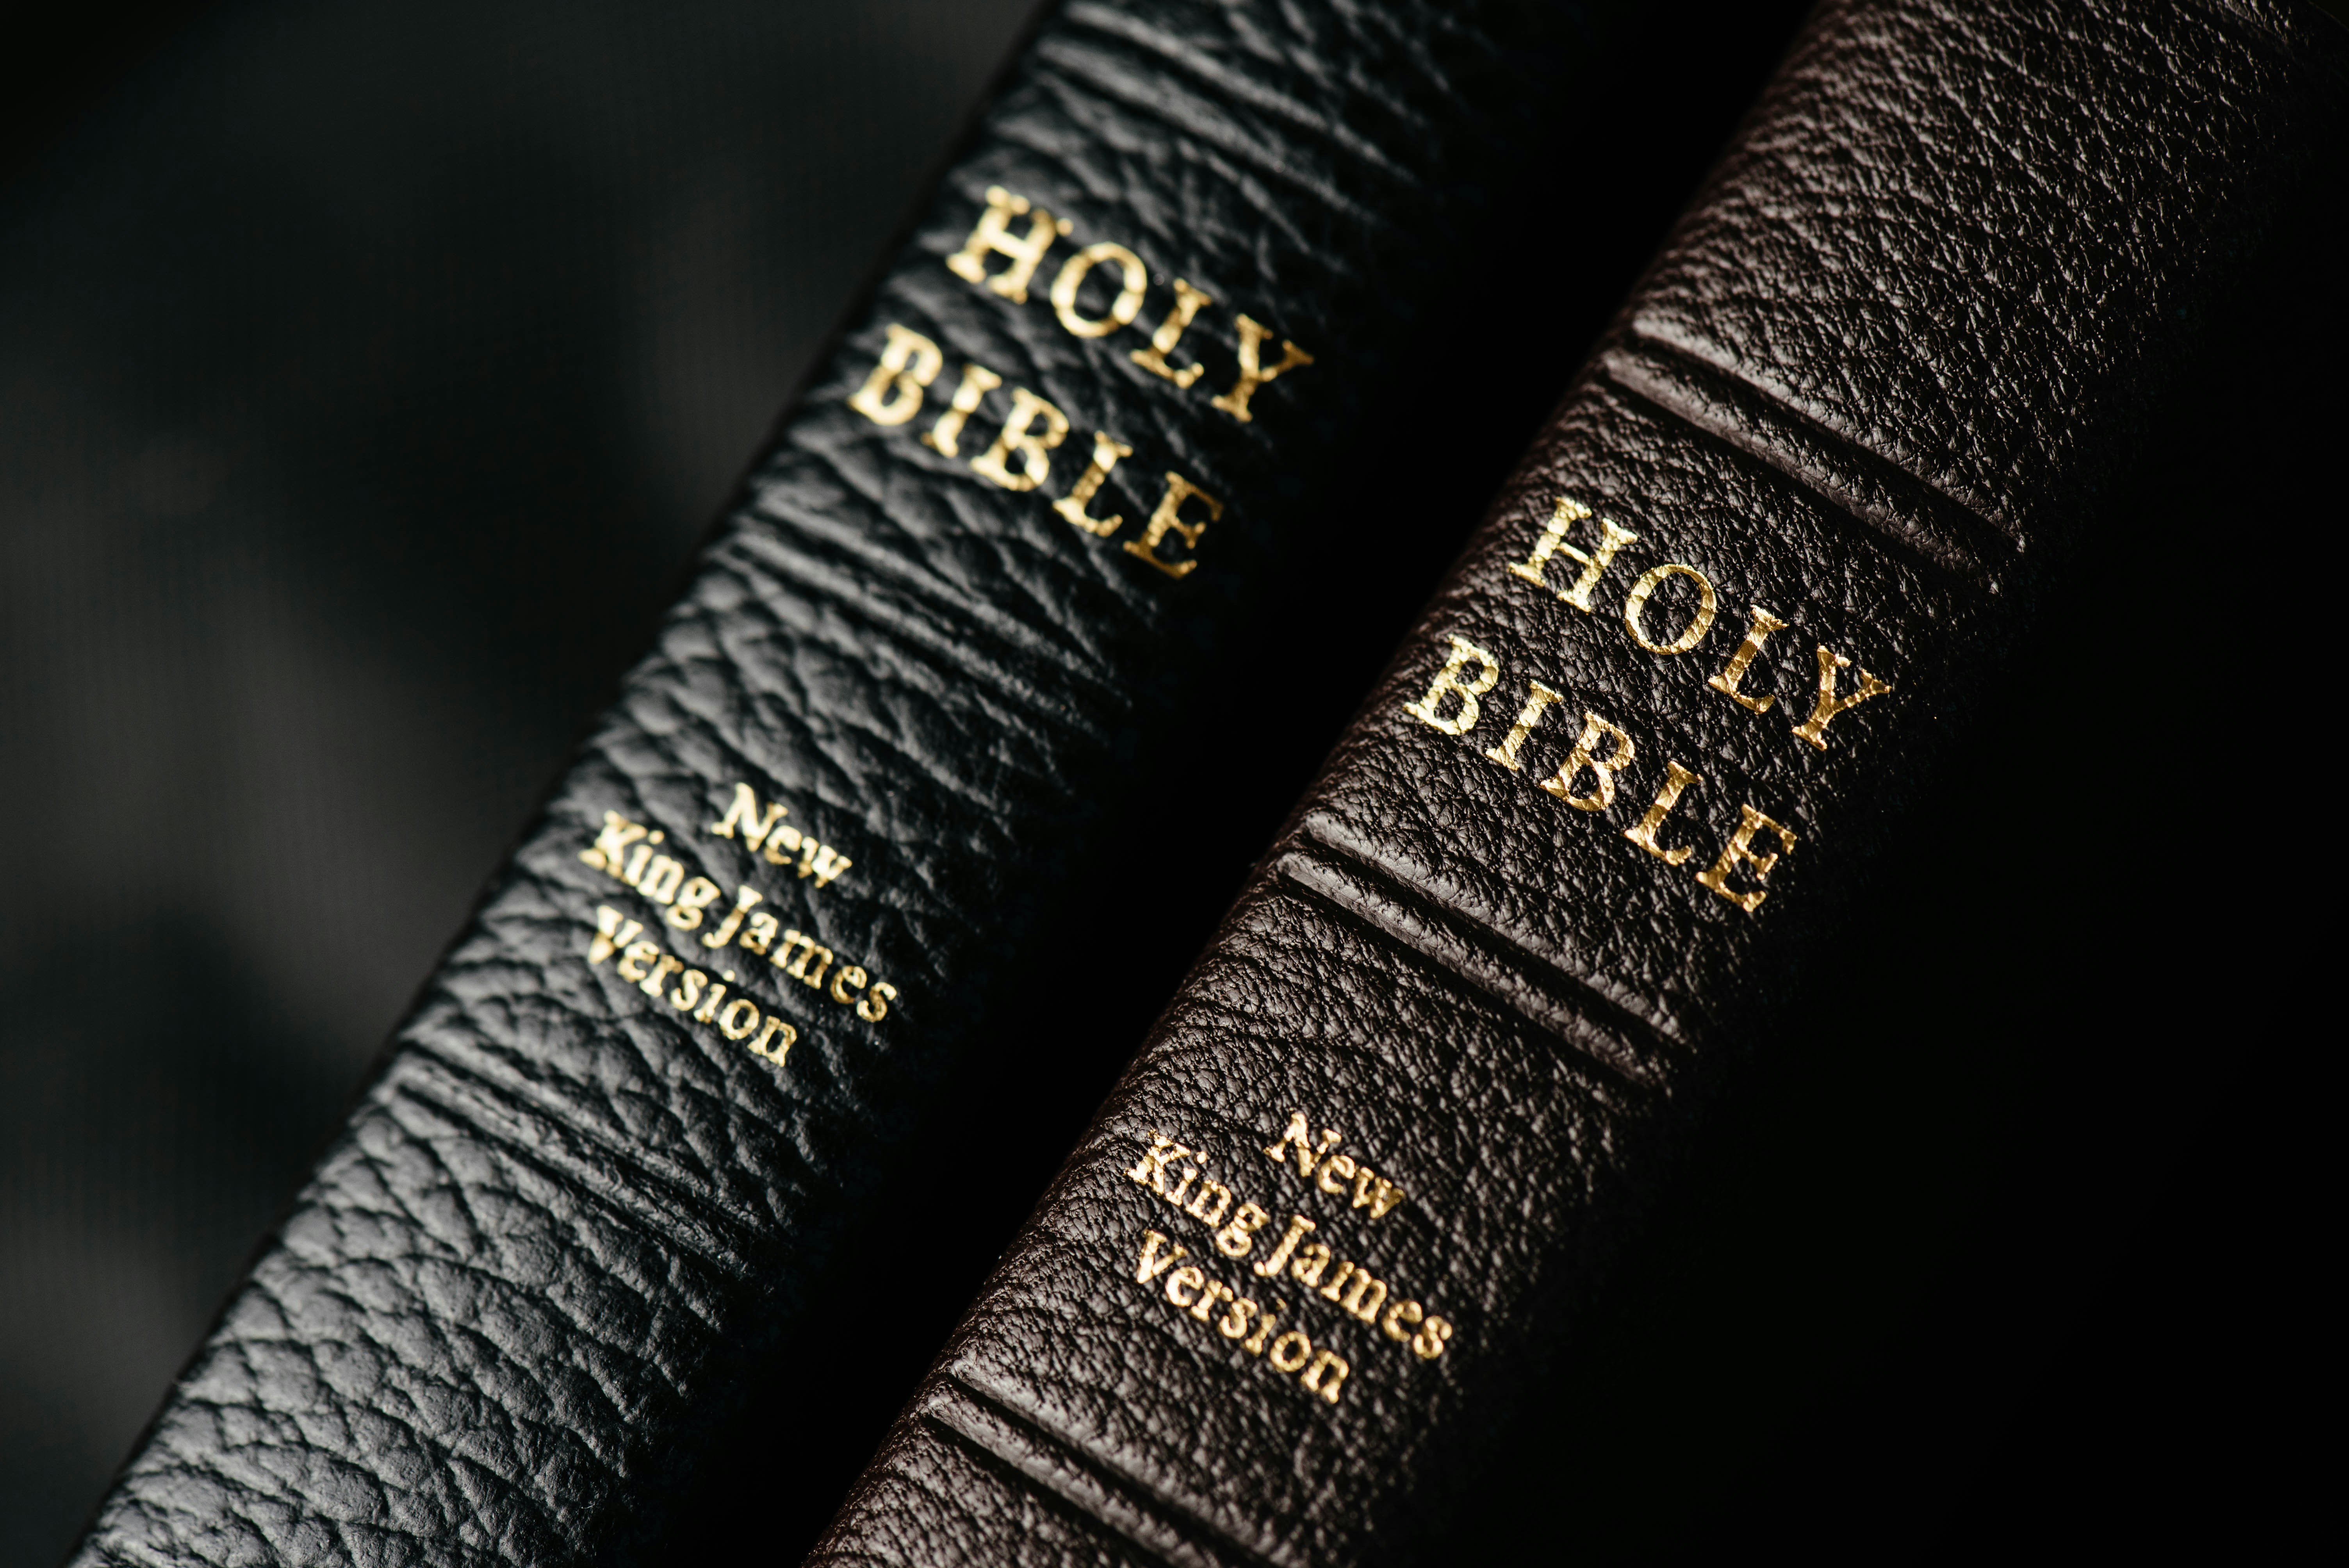 Two leather bibles